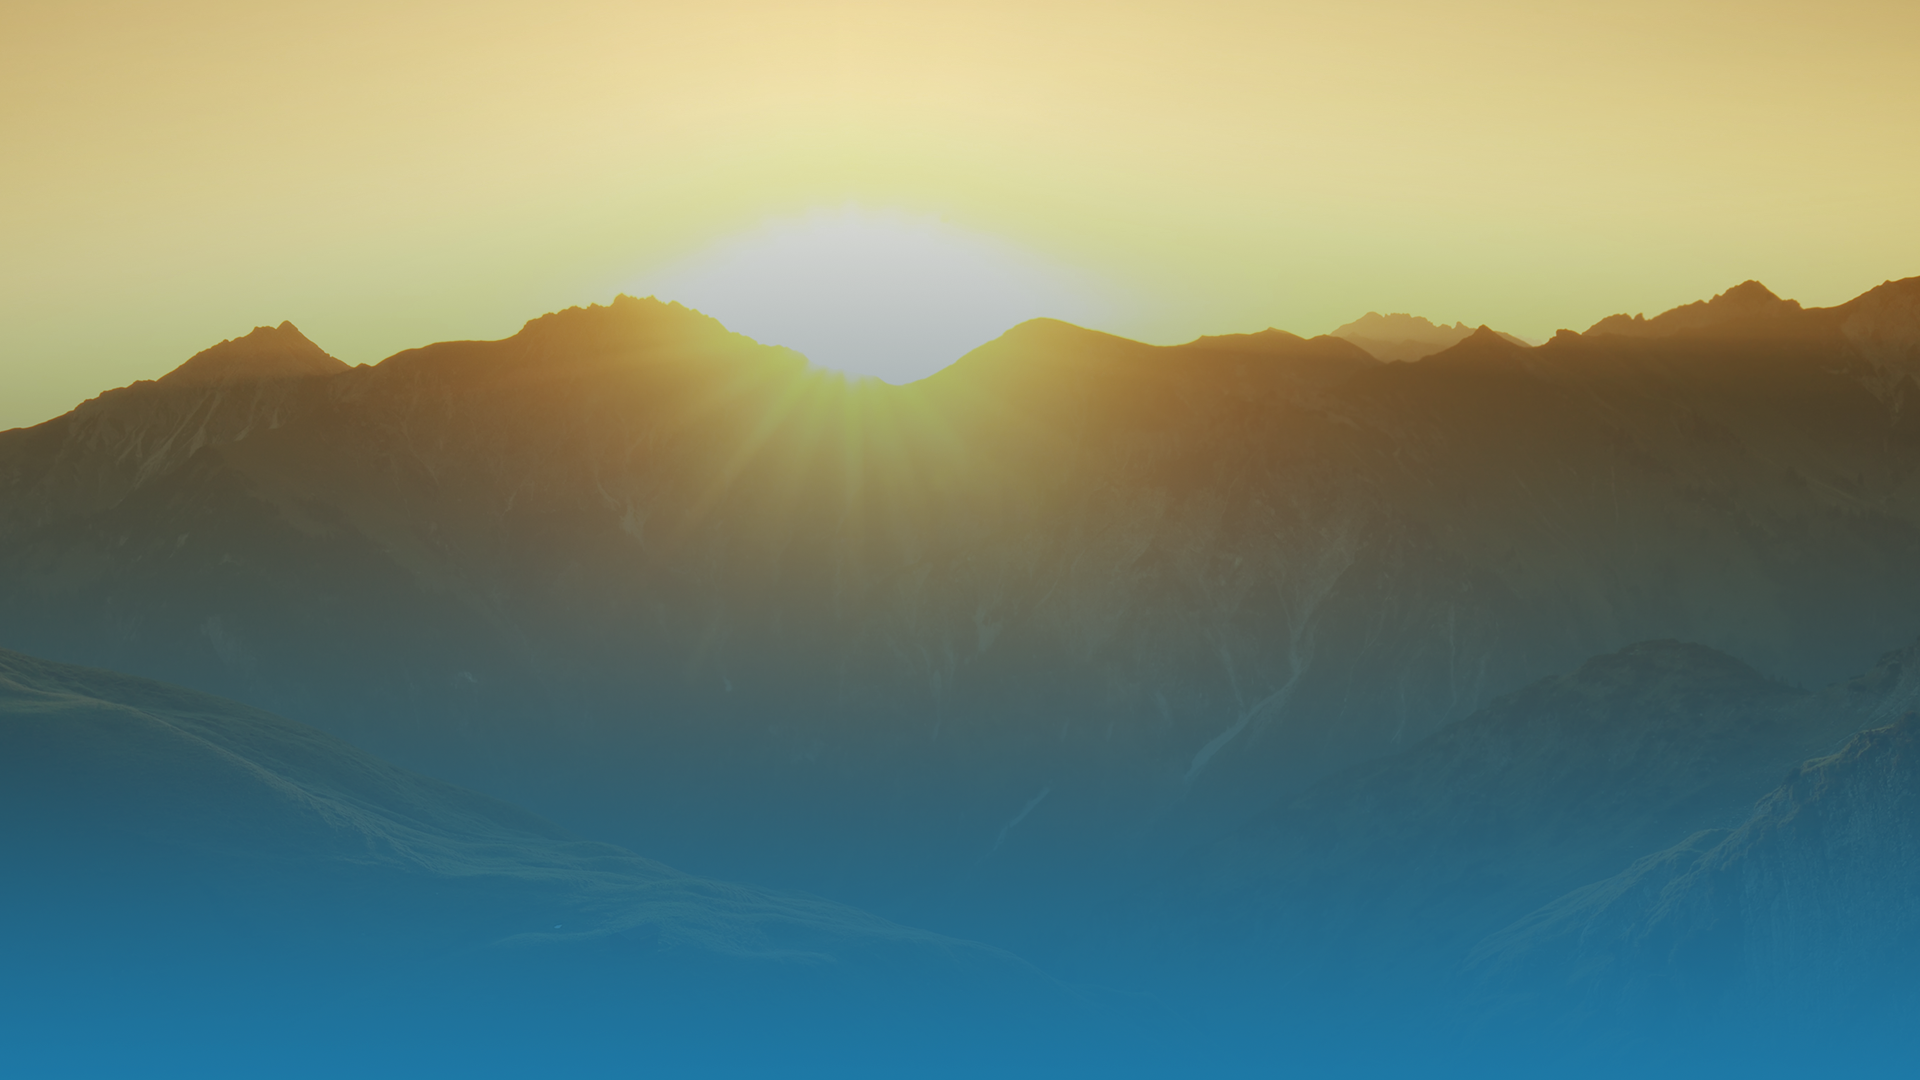 Cover image of a sunrise in the foothills